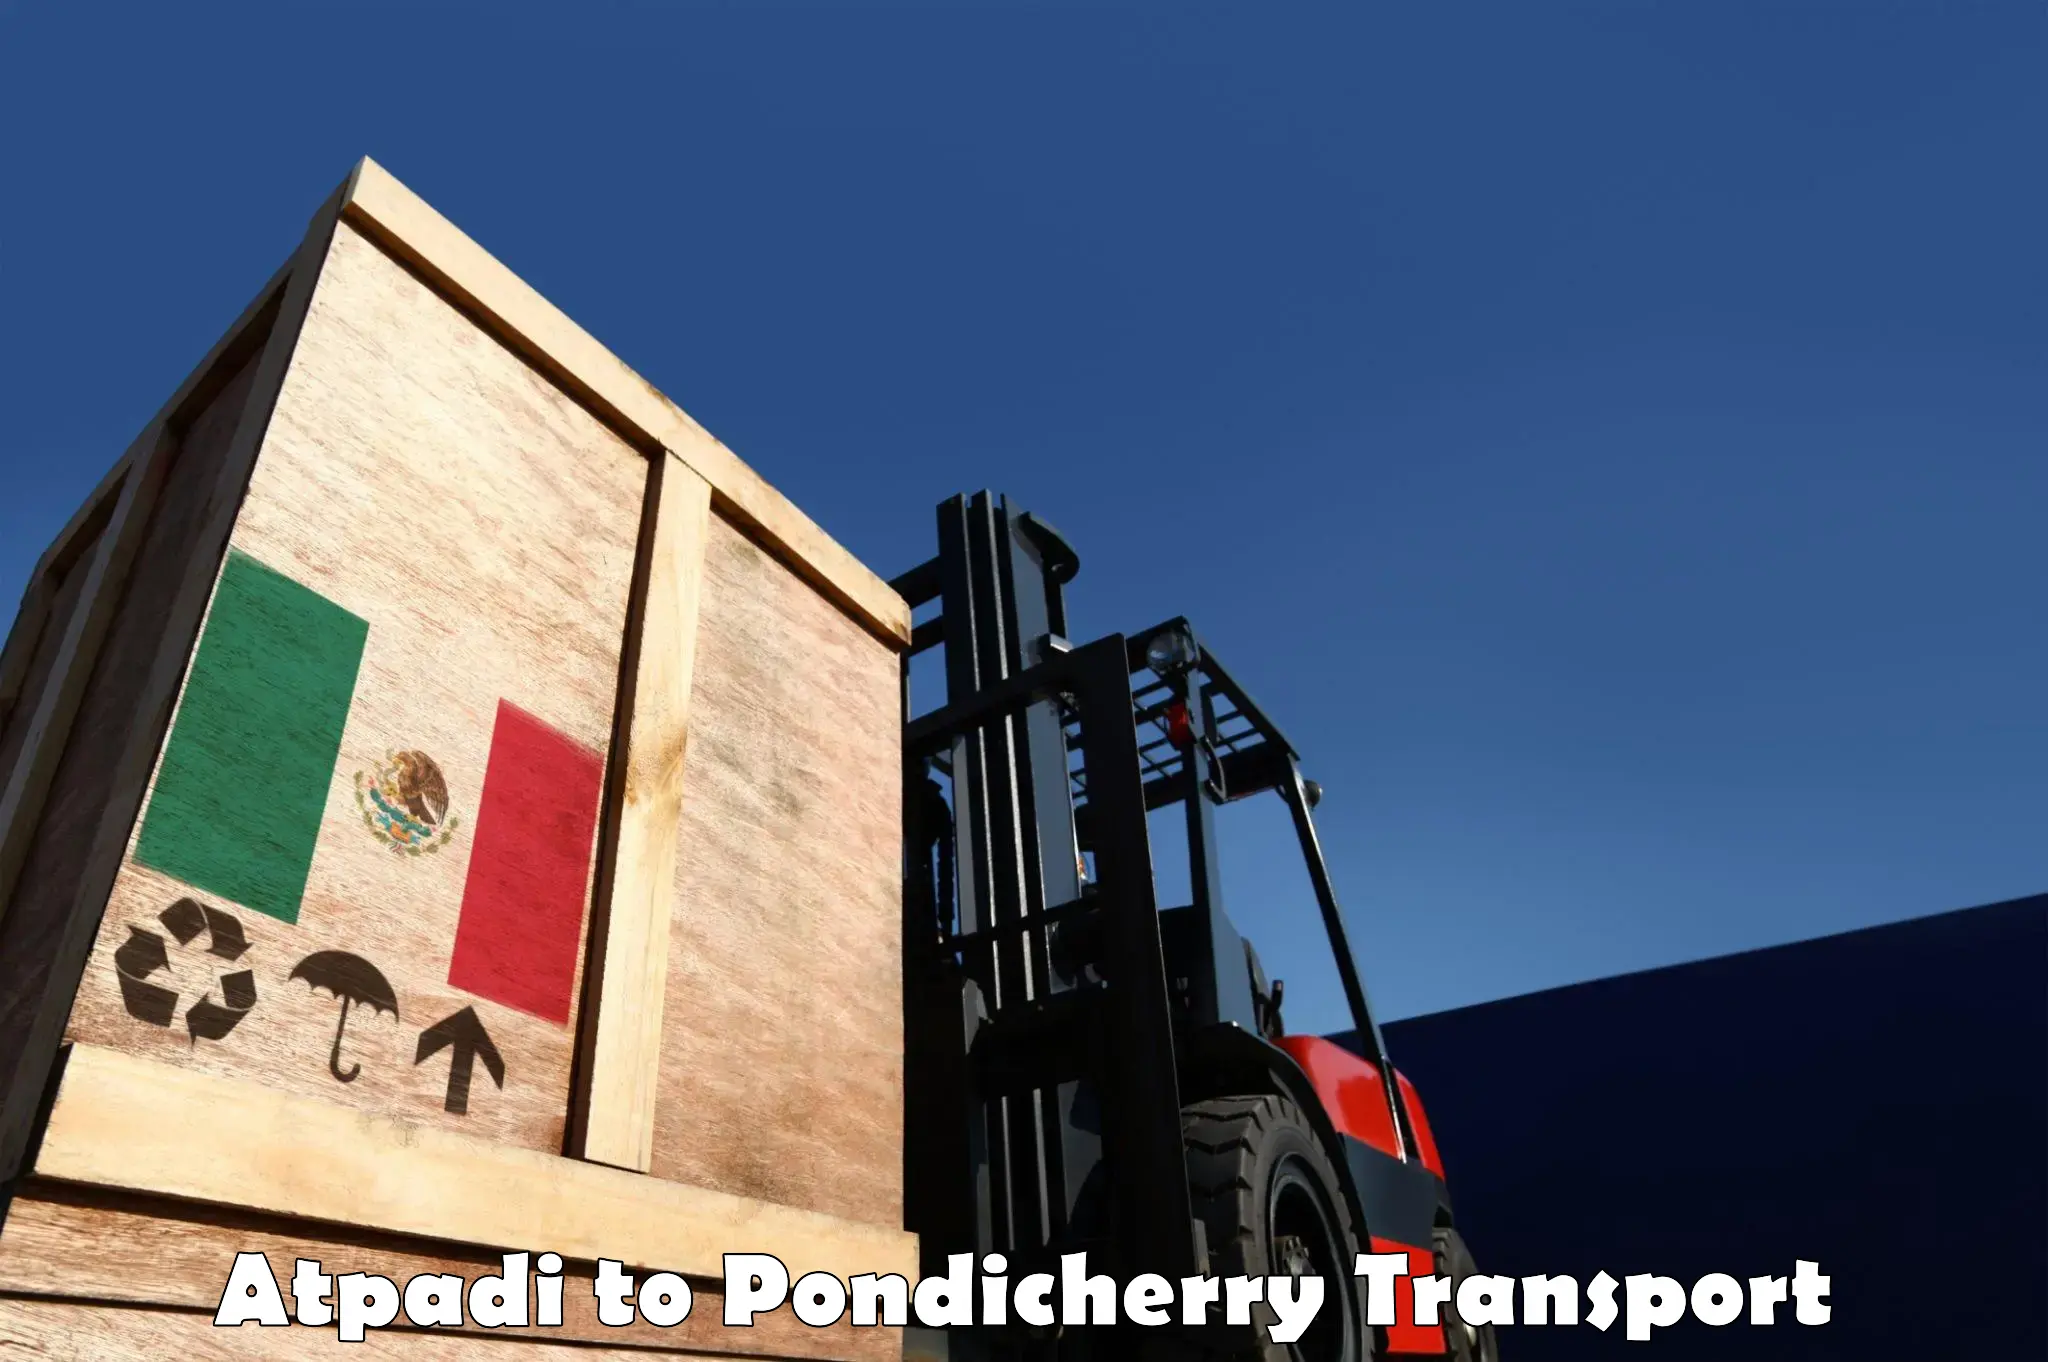 Part load transport service in India Atpadi to Pondicherry